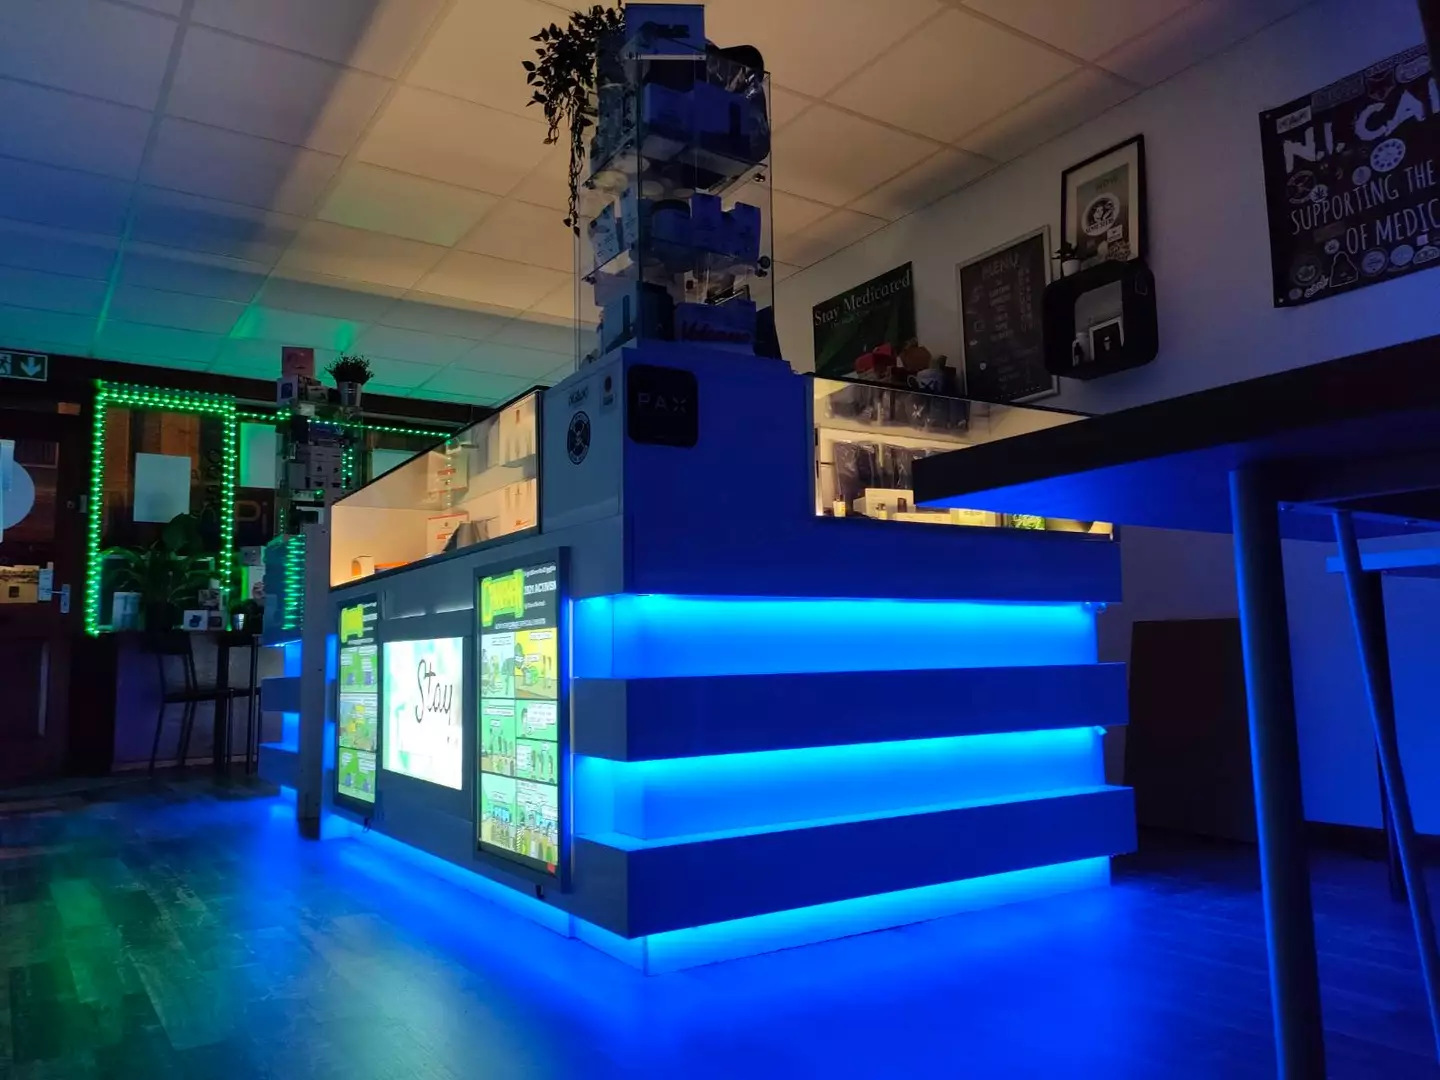 The vape lounge sells drinks, but also allows users to rent vaporisers too.